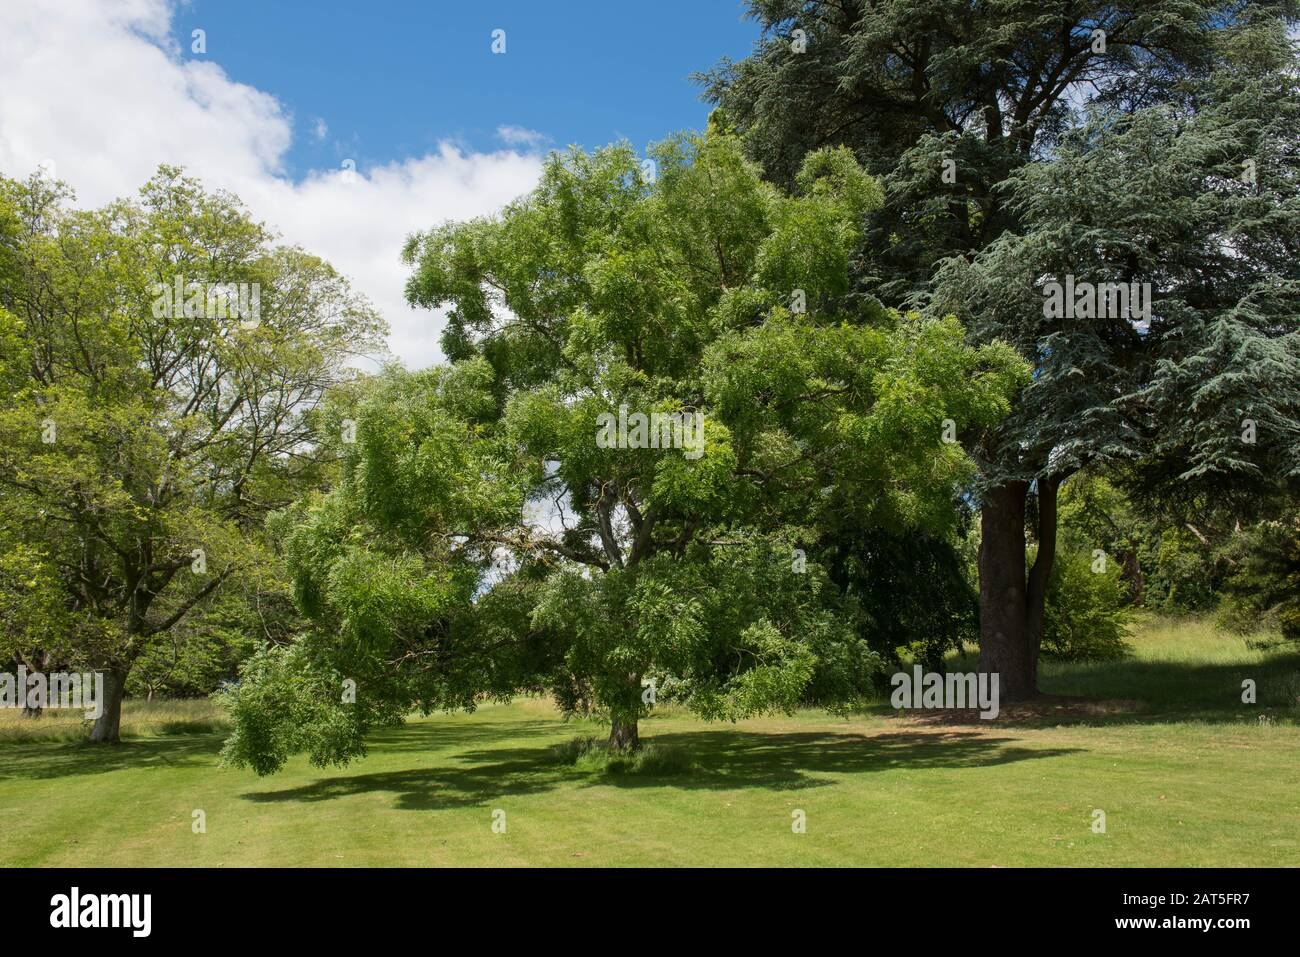 Summer Foliage of a Japanese Pagoda Tree (Sophora or Styphnolobium japonicum) in a Park in Rural Devon, England, UK Stock Photo